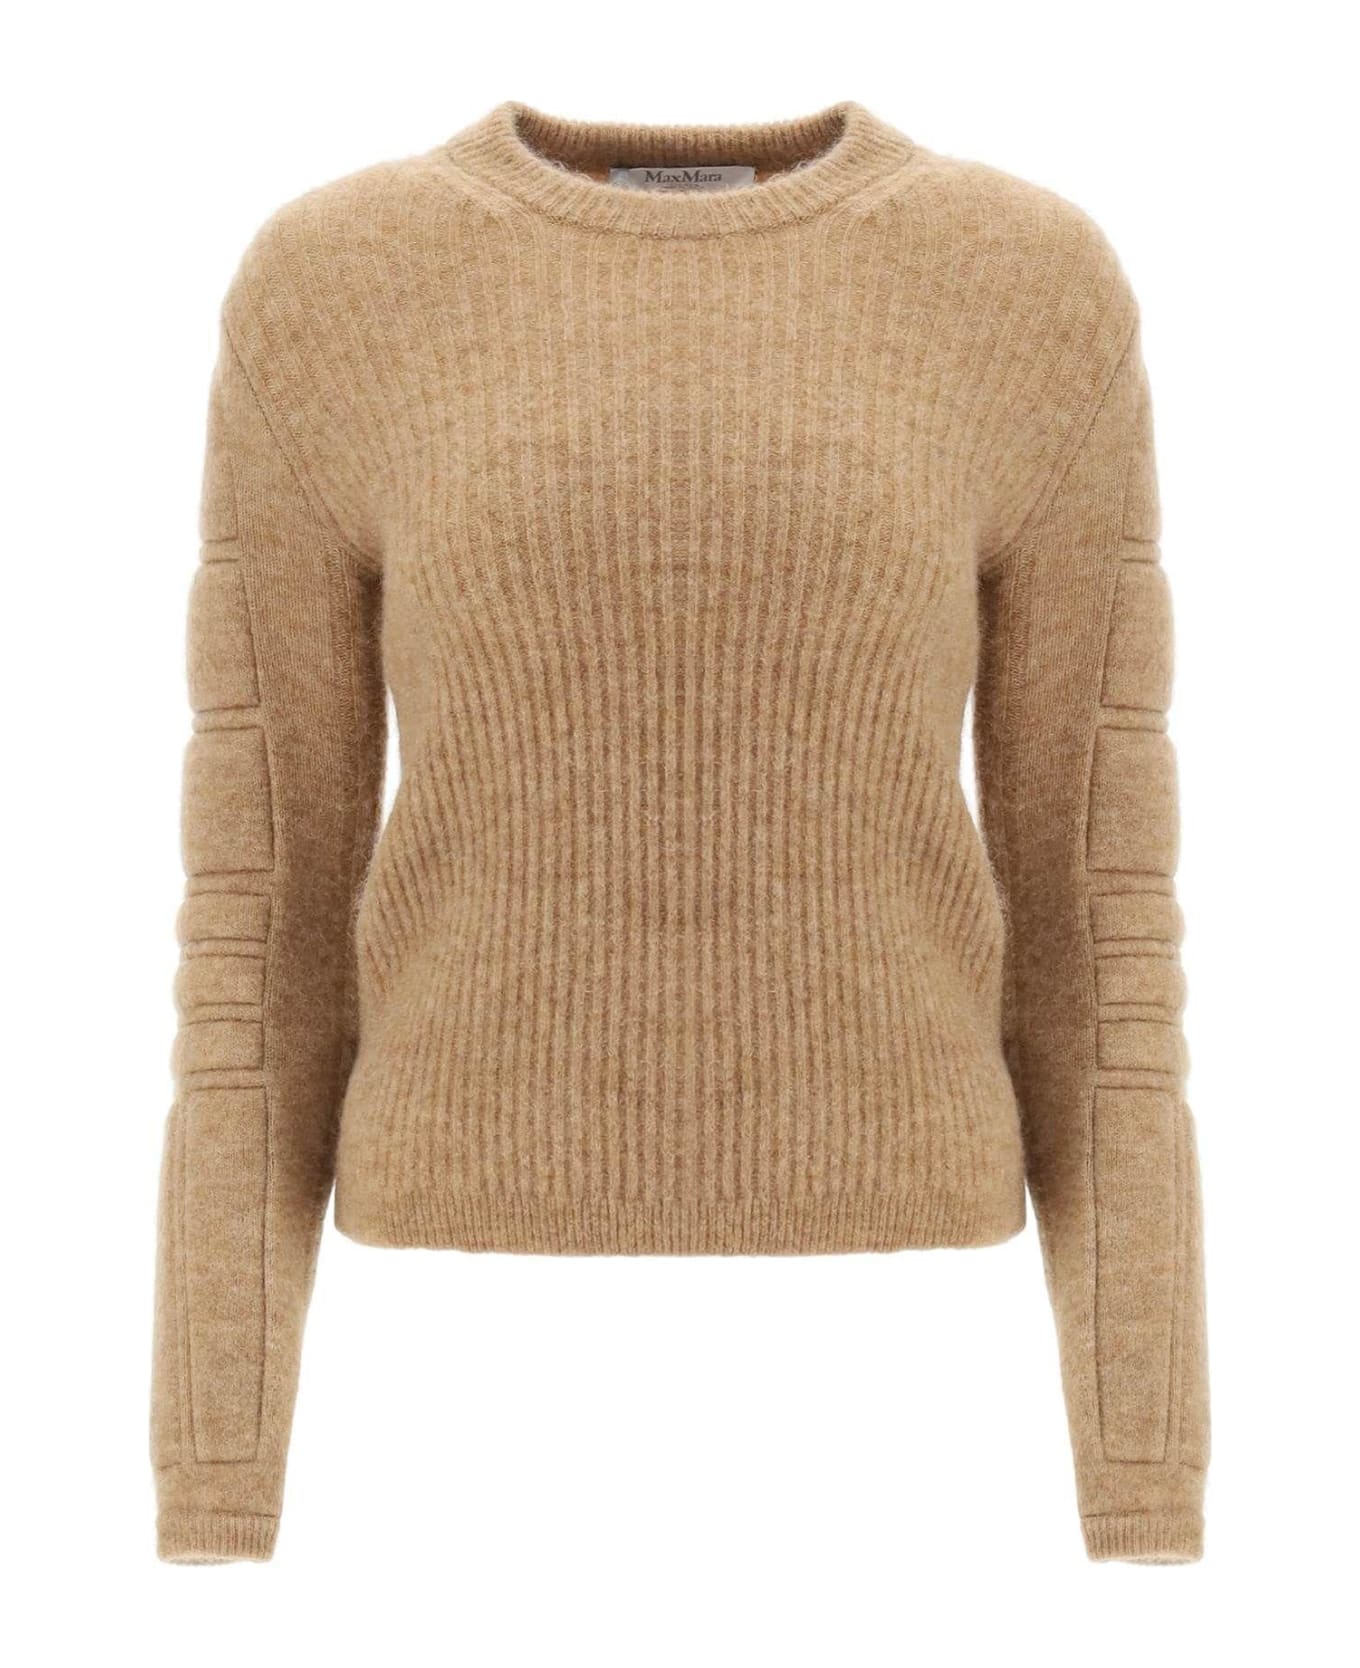 Max Mara 'smirne' Sweater In Wool And Mohair - BEIGE